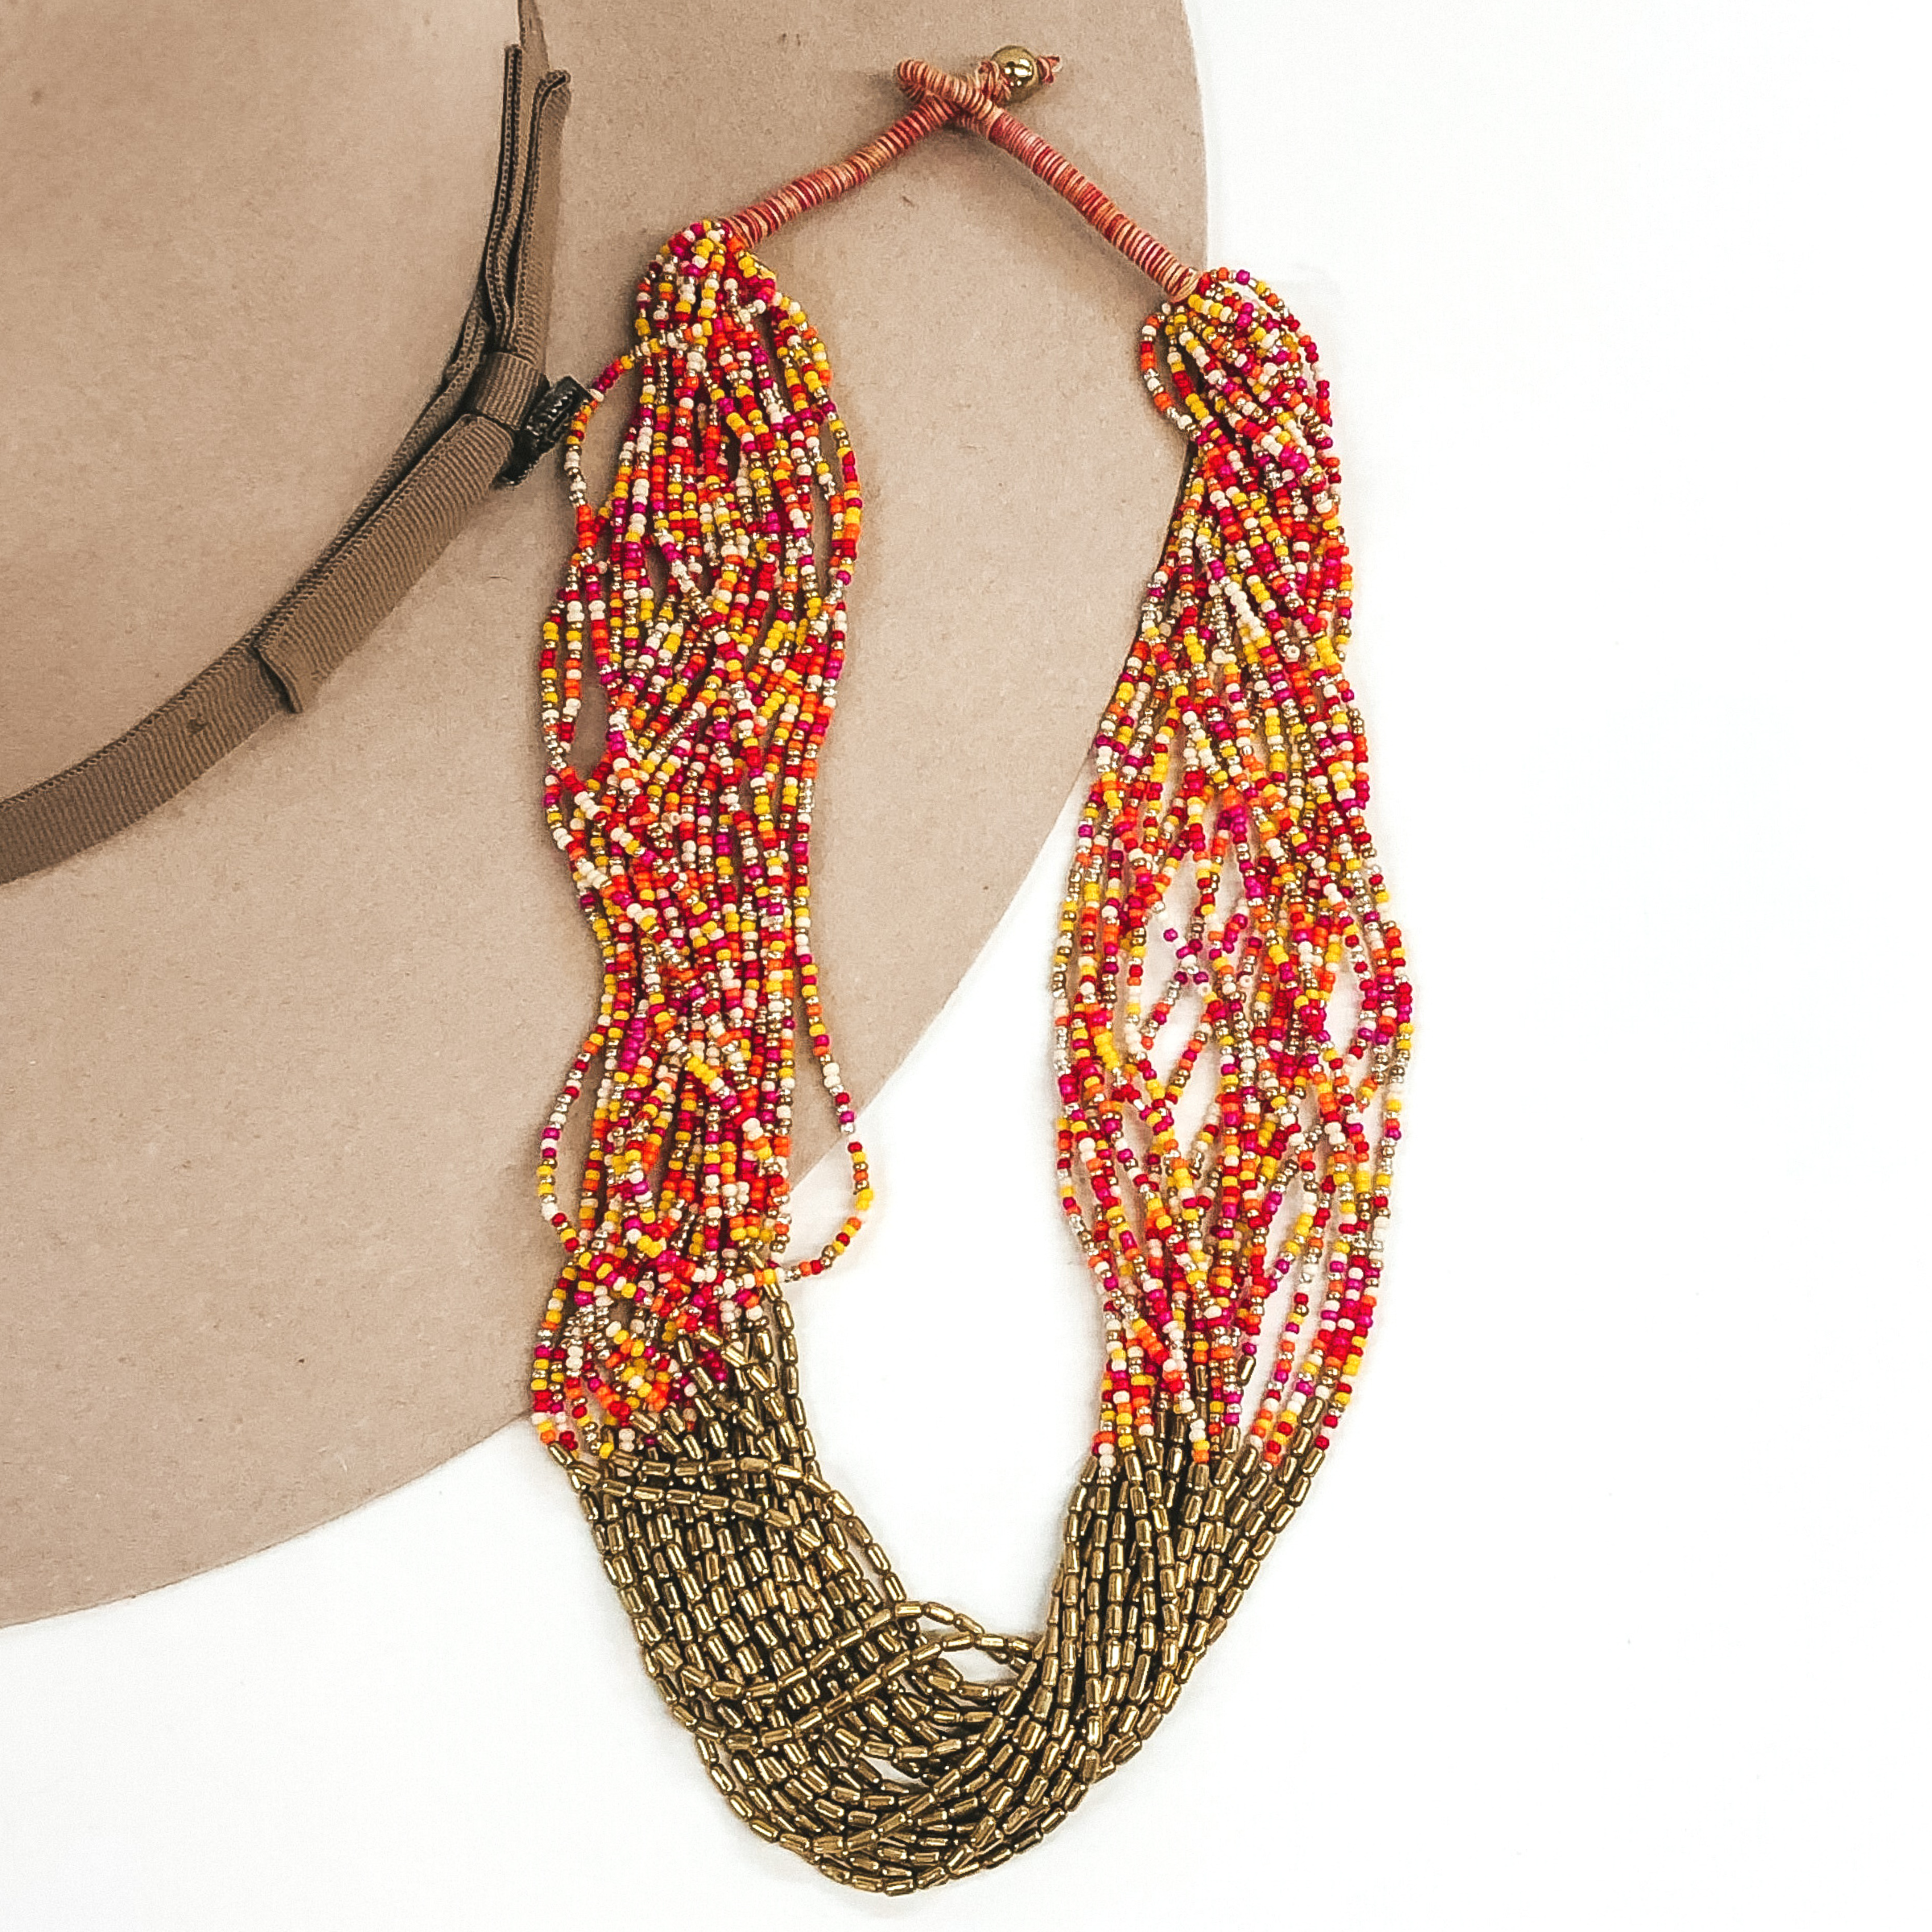 The strands on this necklace have multicolored beads and gold beads in the middle of the string. There are a lot of single strings put together to make a single necklace. The necklace has a gold bead that goes through a loop to put the necklace on. This necklace is pictured laying on a beige hat on a white background.